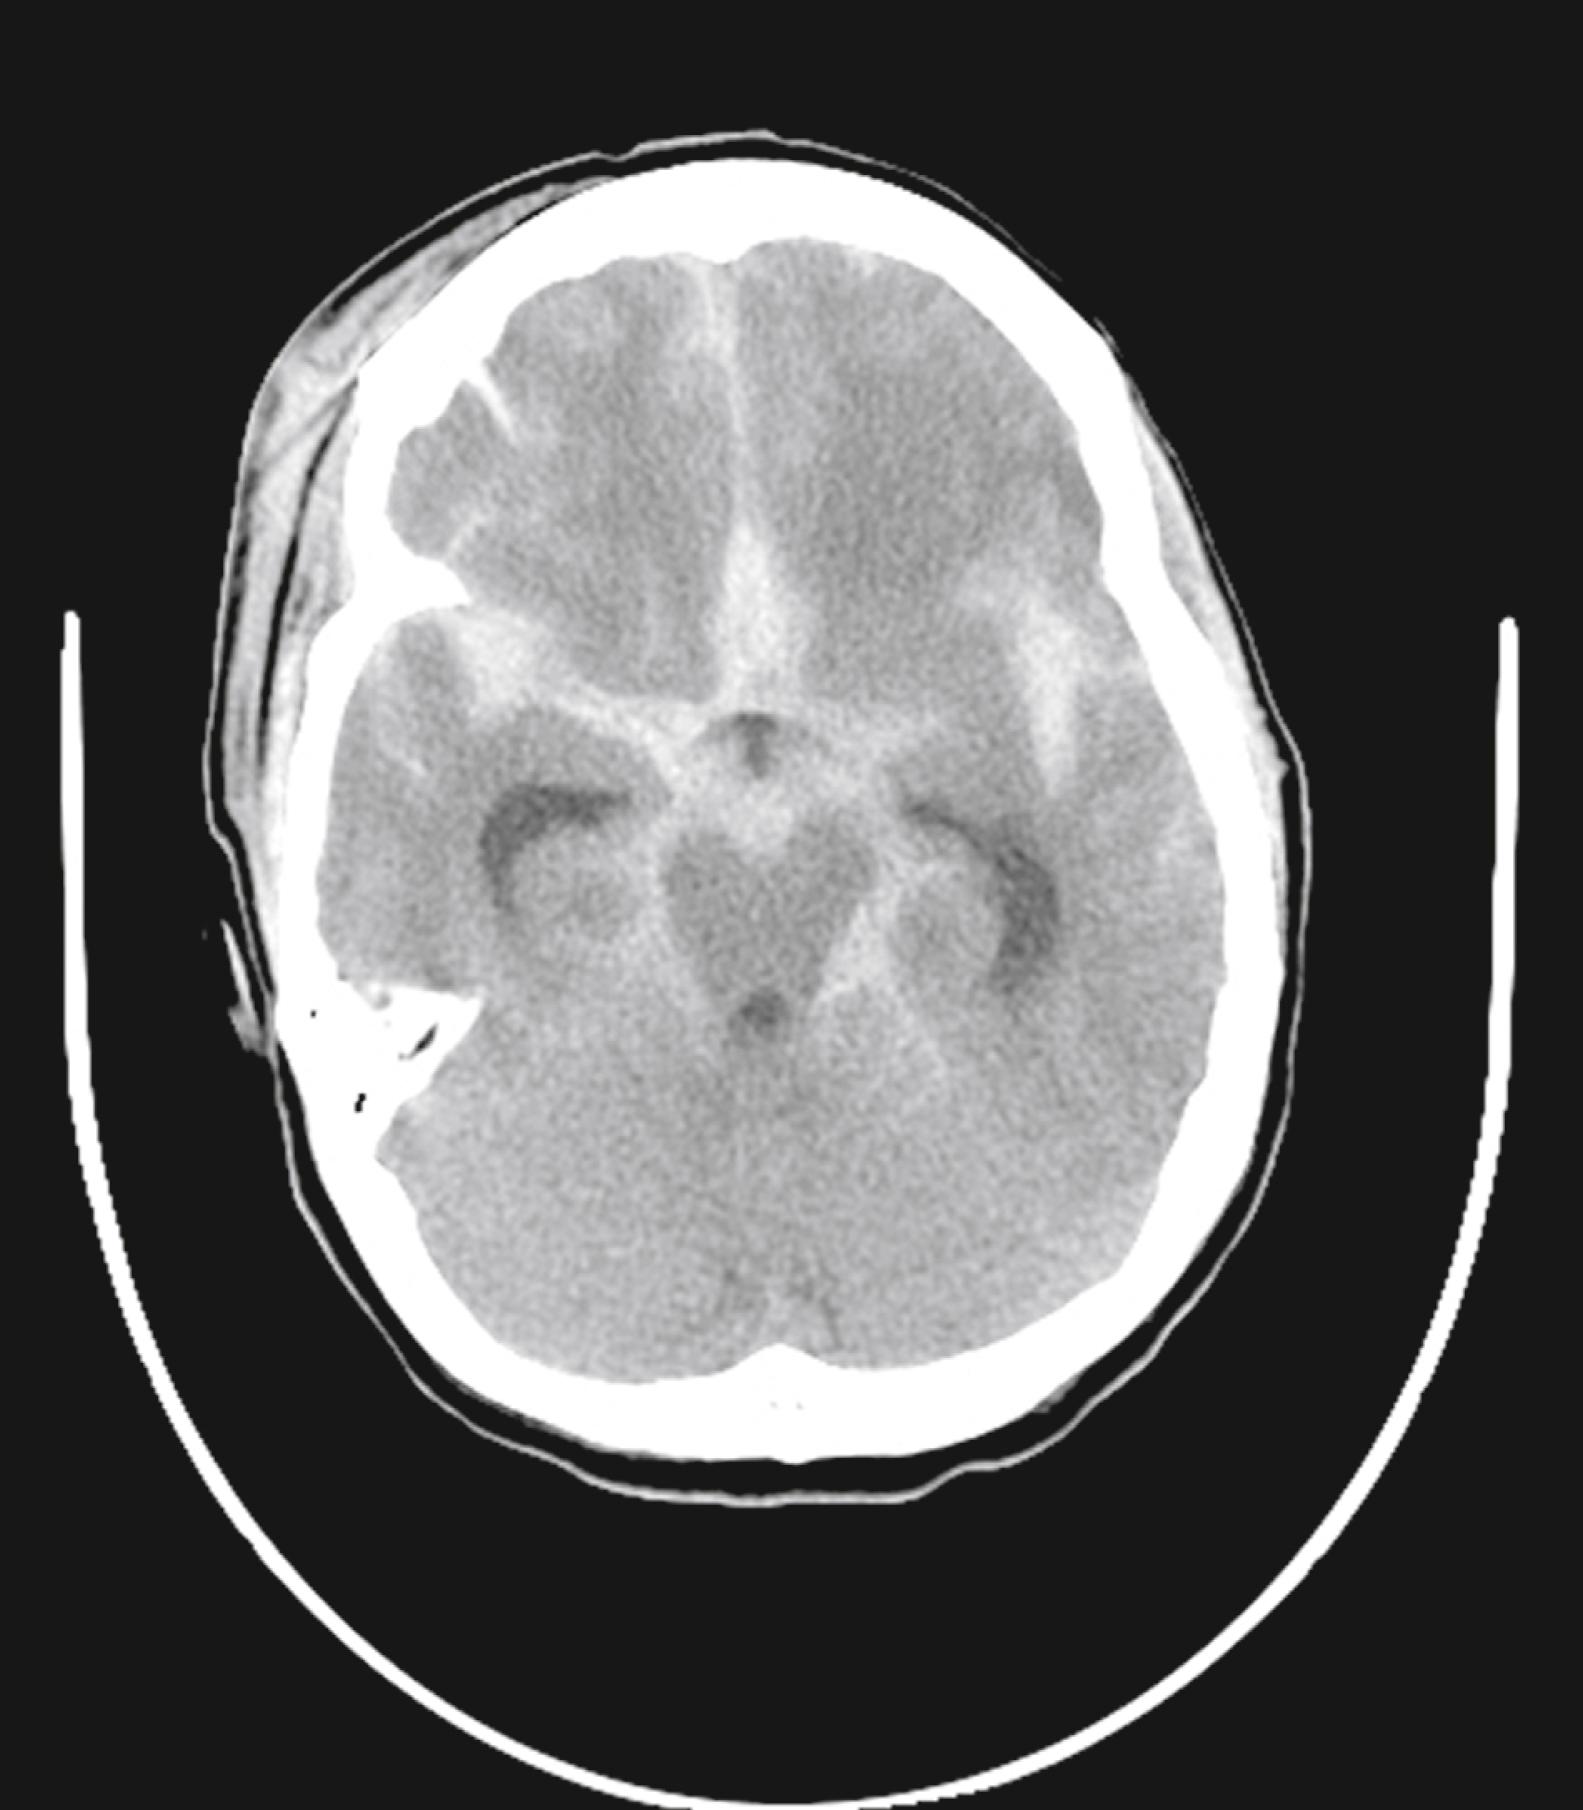 Figure 10.3, Acute diffuse subarachnoid hemorrhages within the suprasellar cistern, ambient cistern, and frontal and temporal sulci.